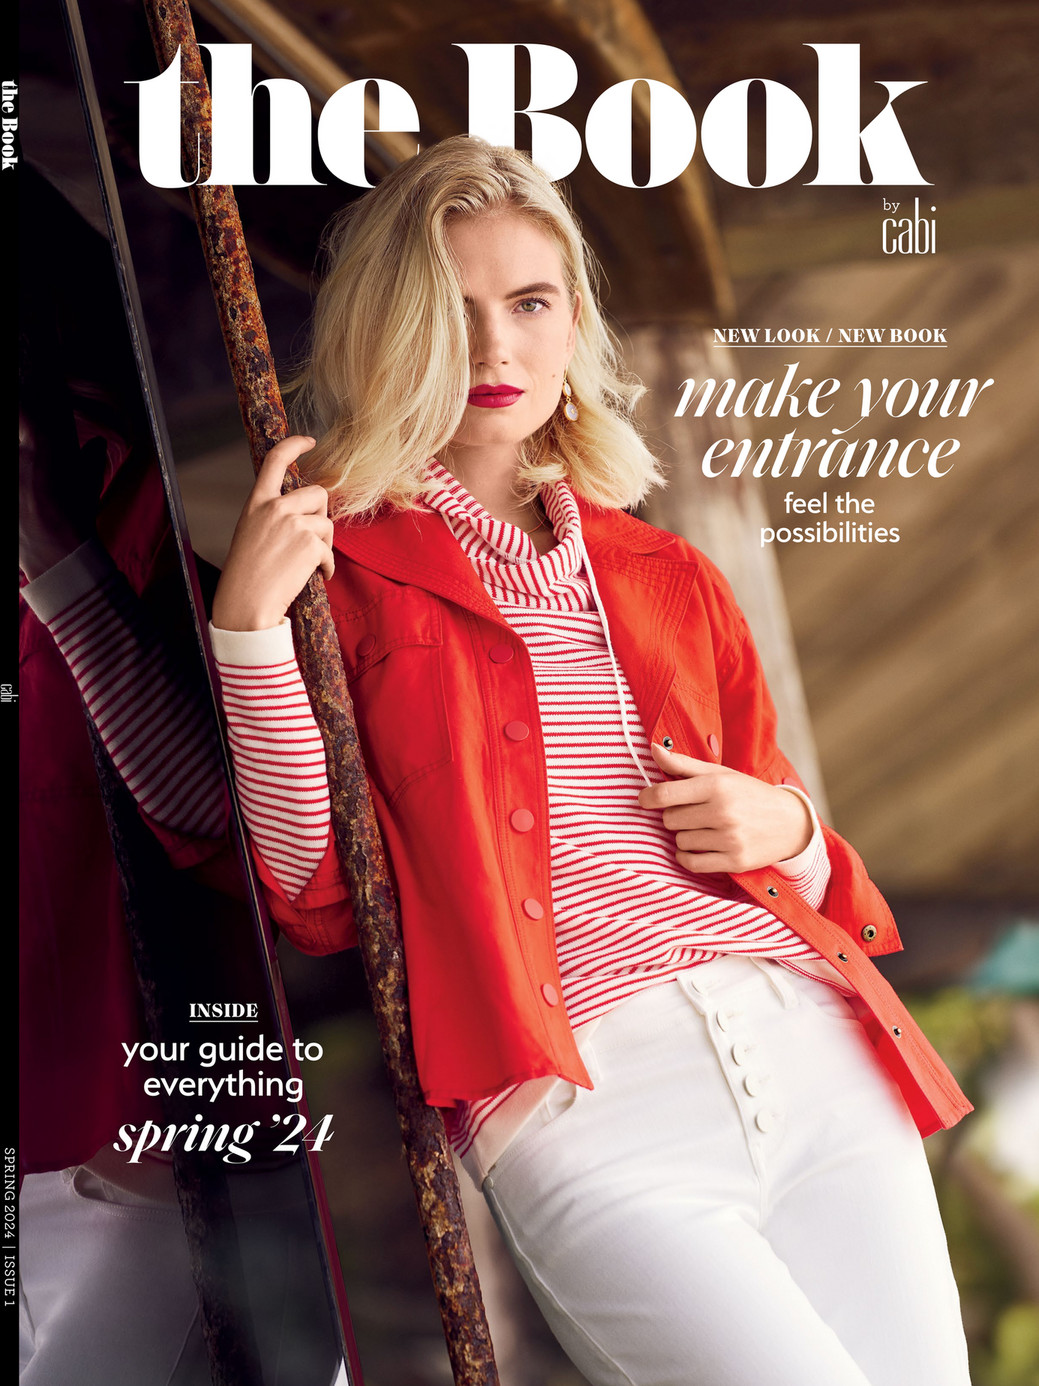 You will look fabulous in this new spring 2024 collection from Cabi! 